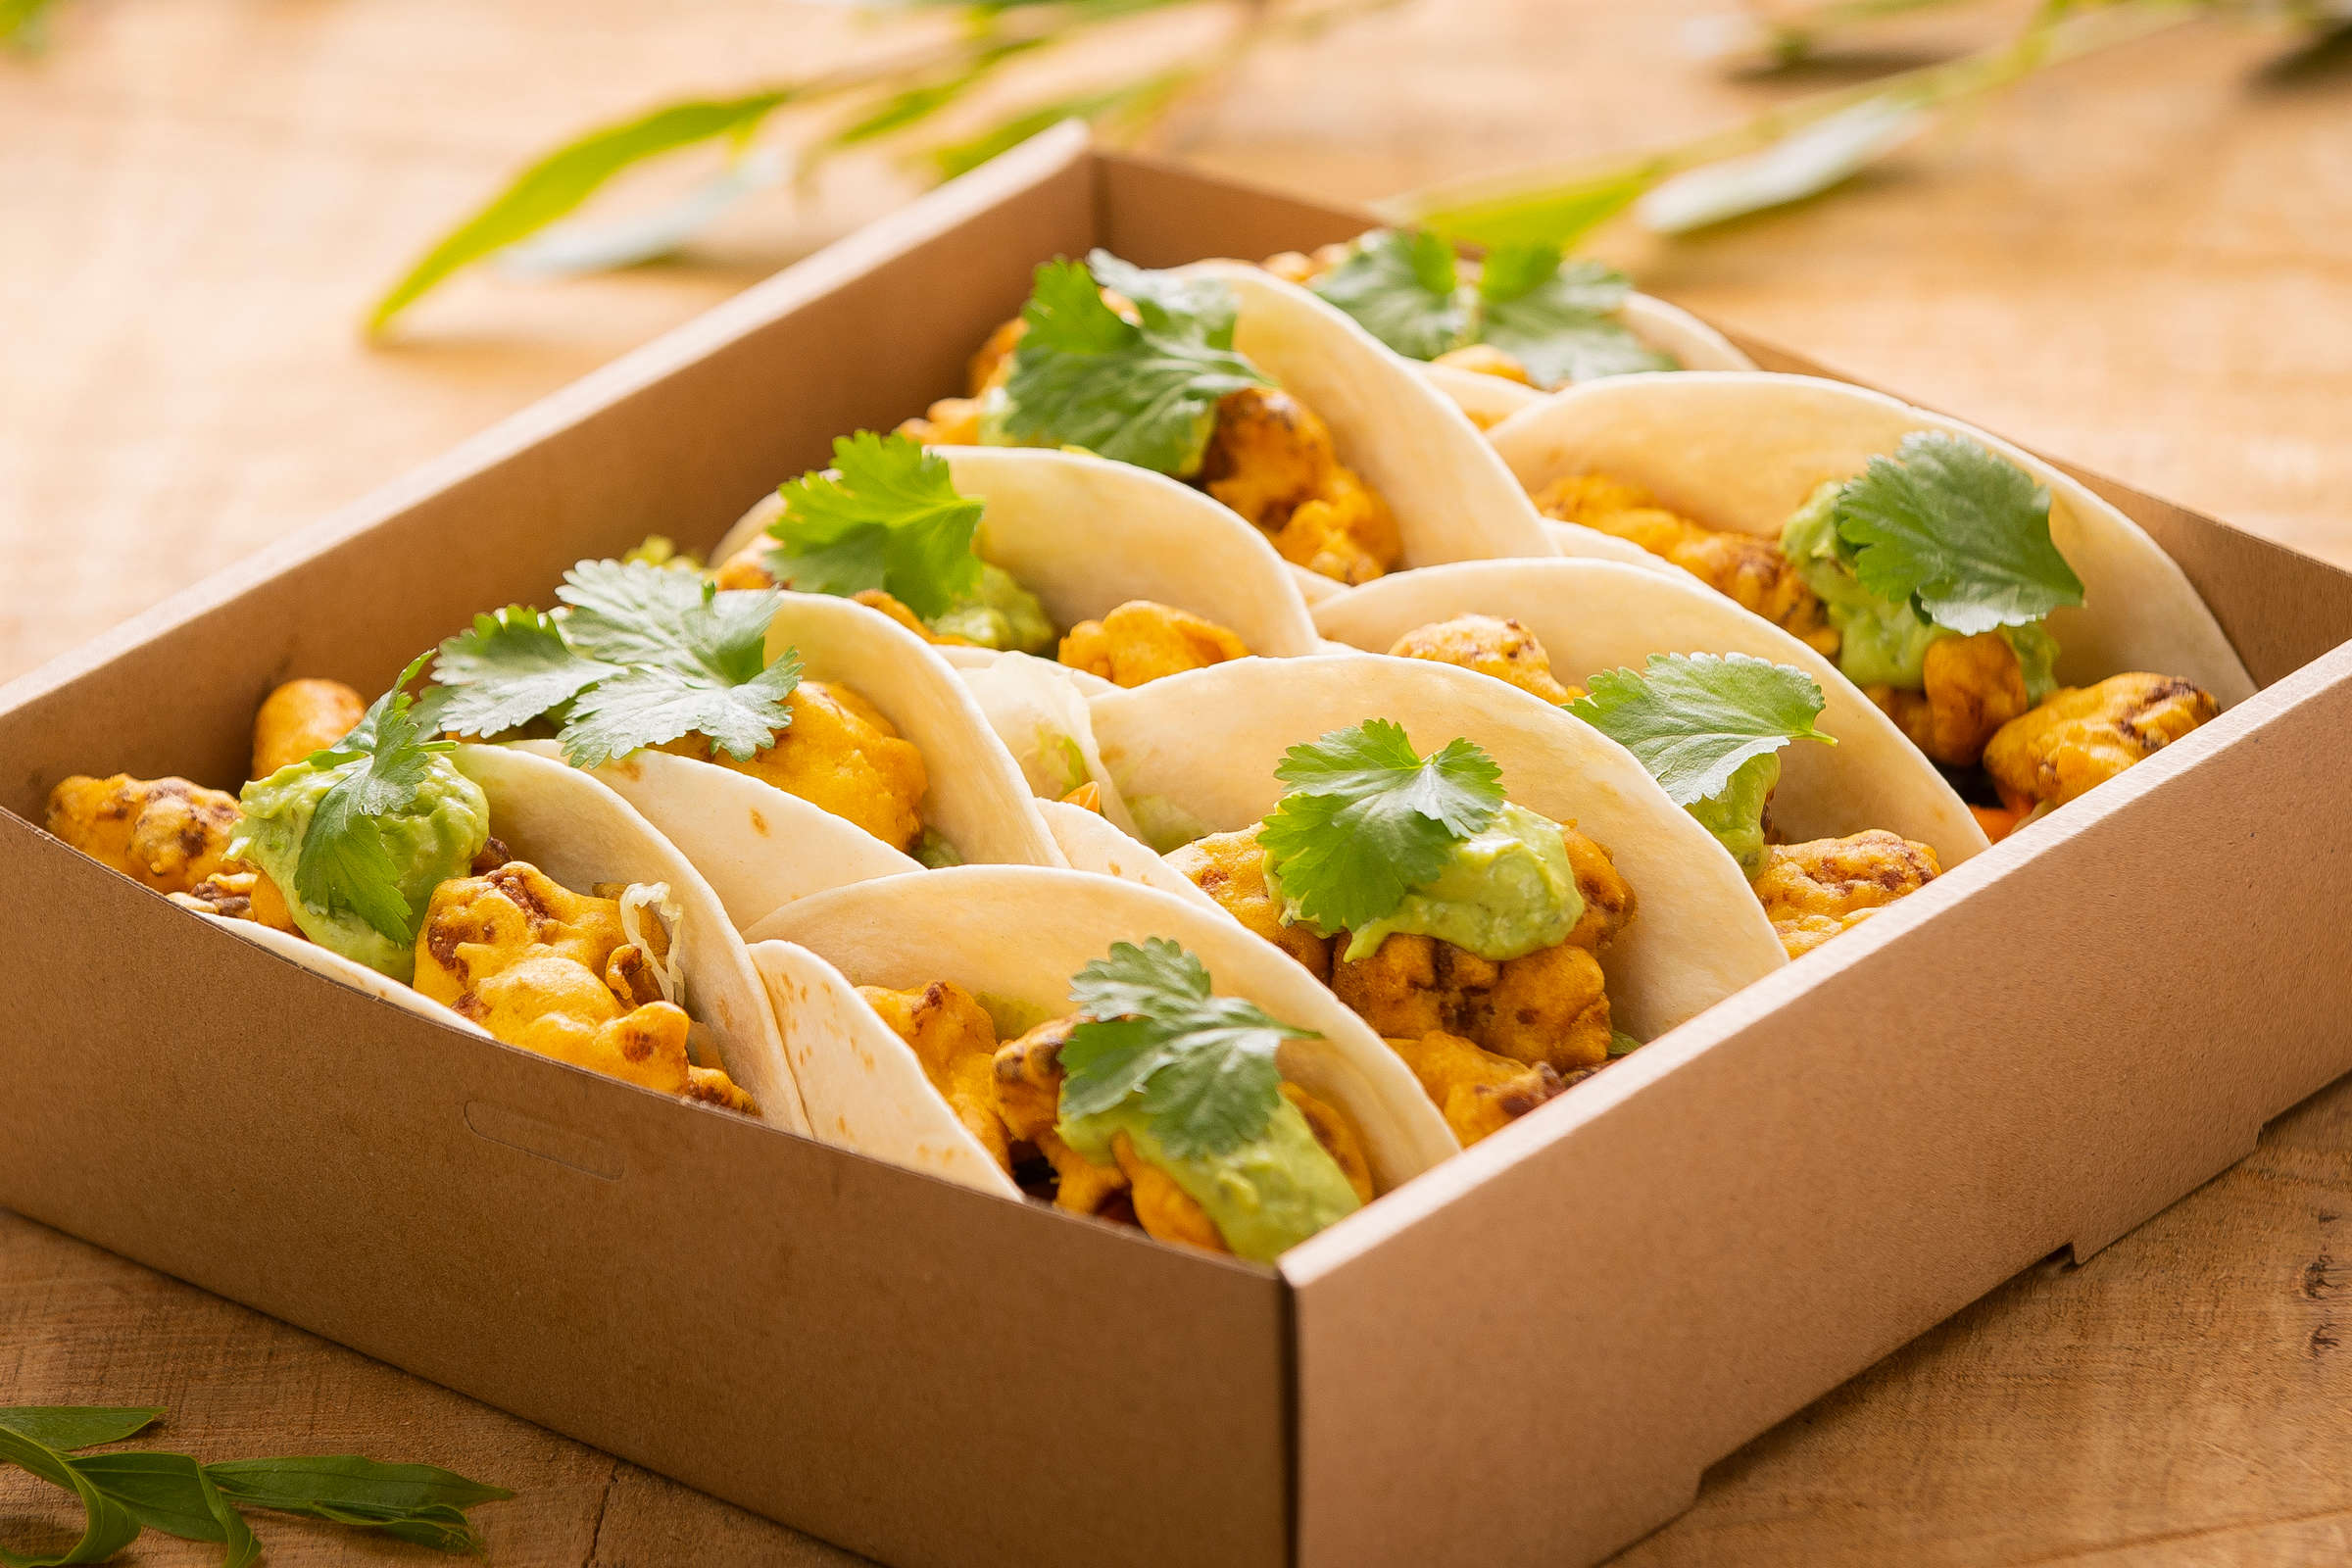 Taco box containing 10 tacos fillings include fried cauliflower. Credit: Richard Jupe.